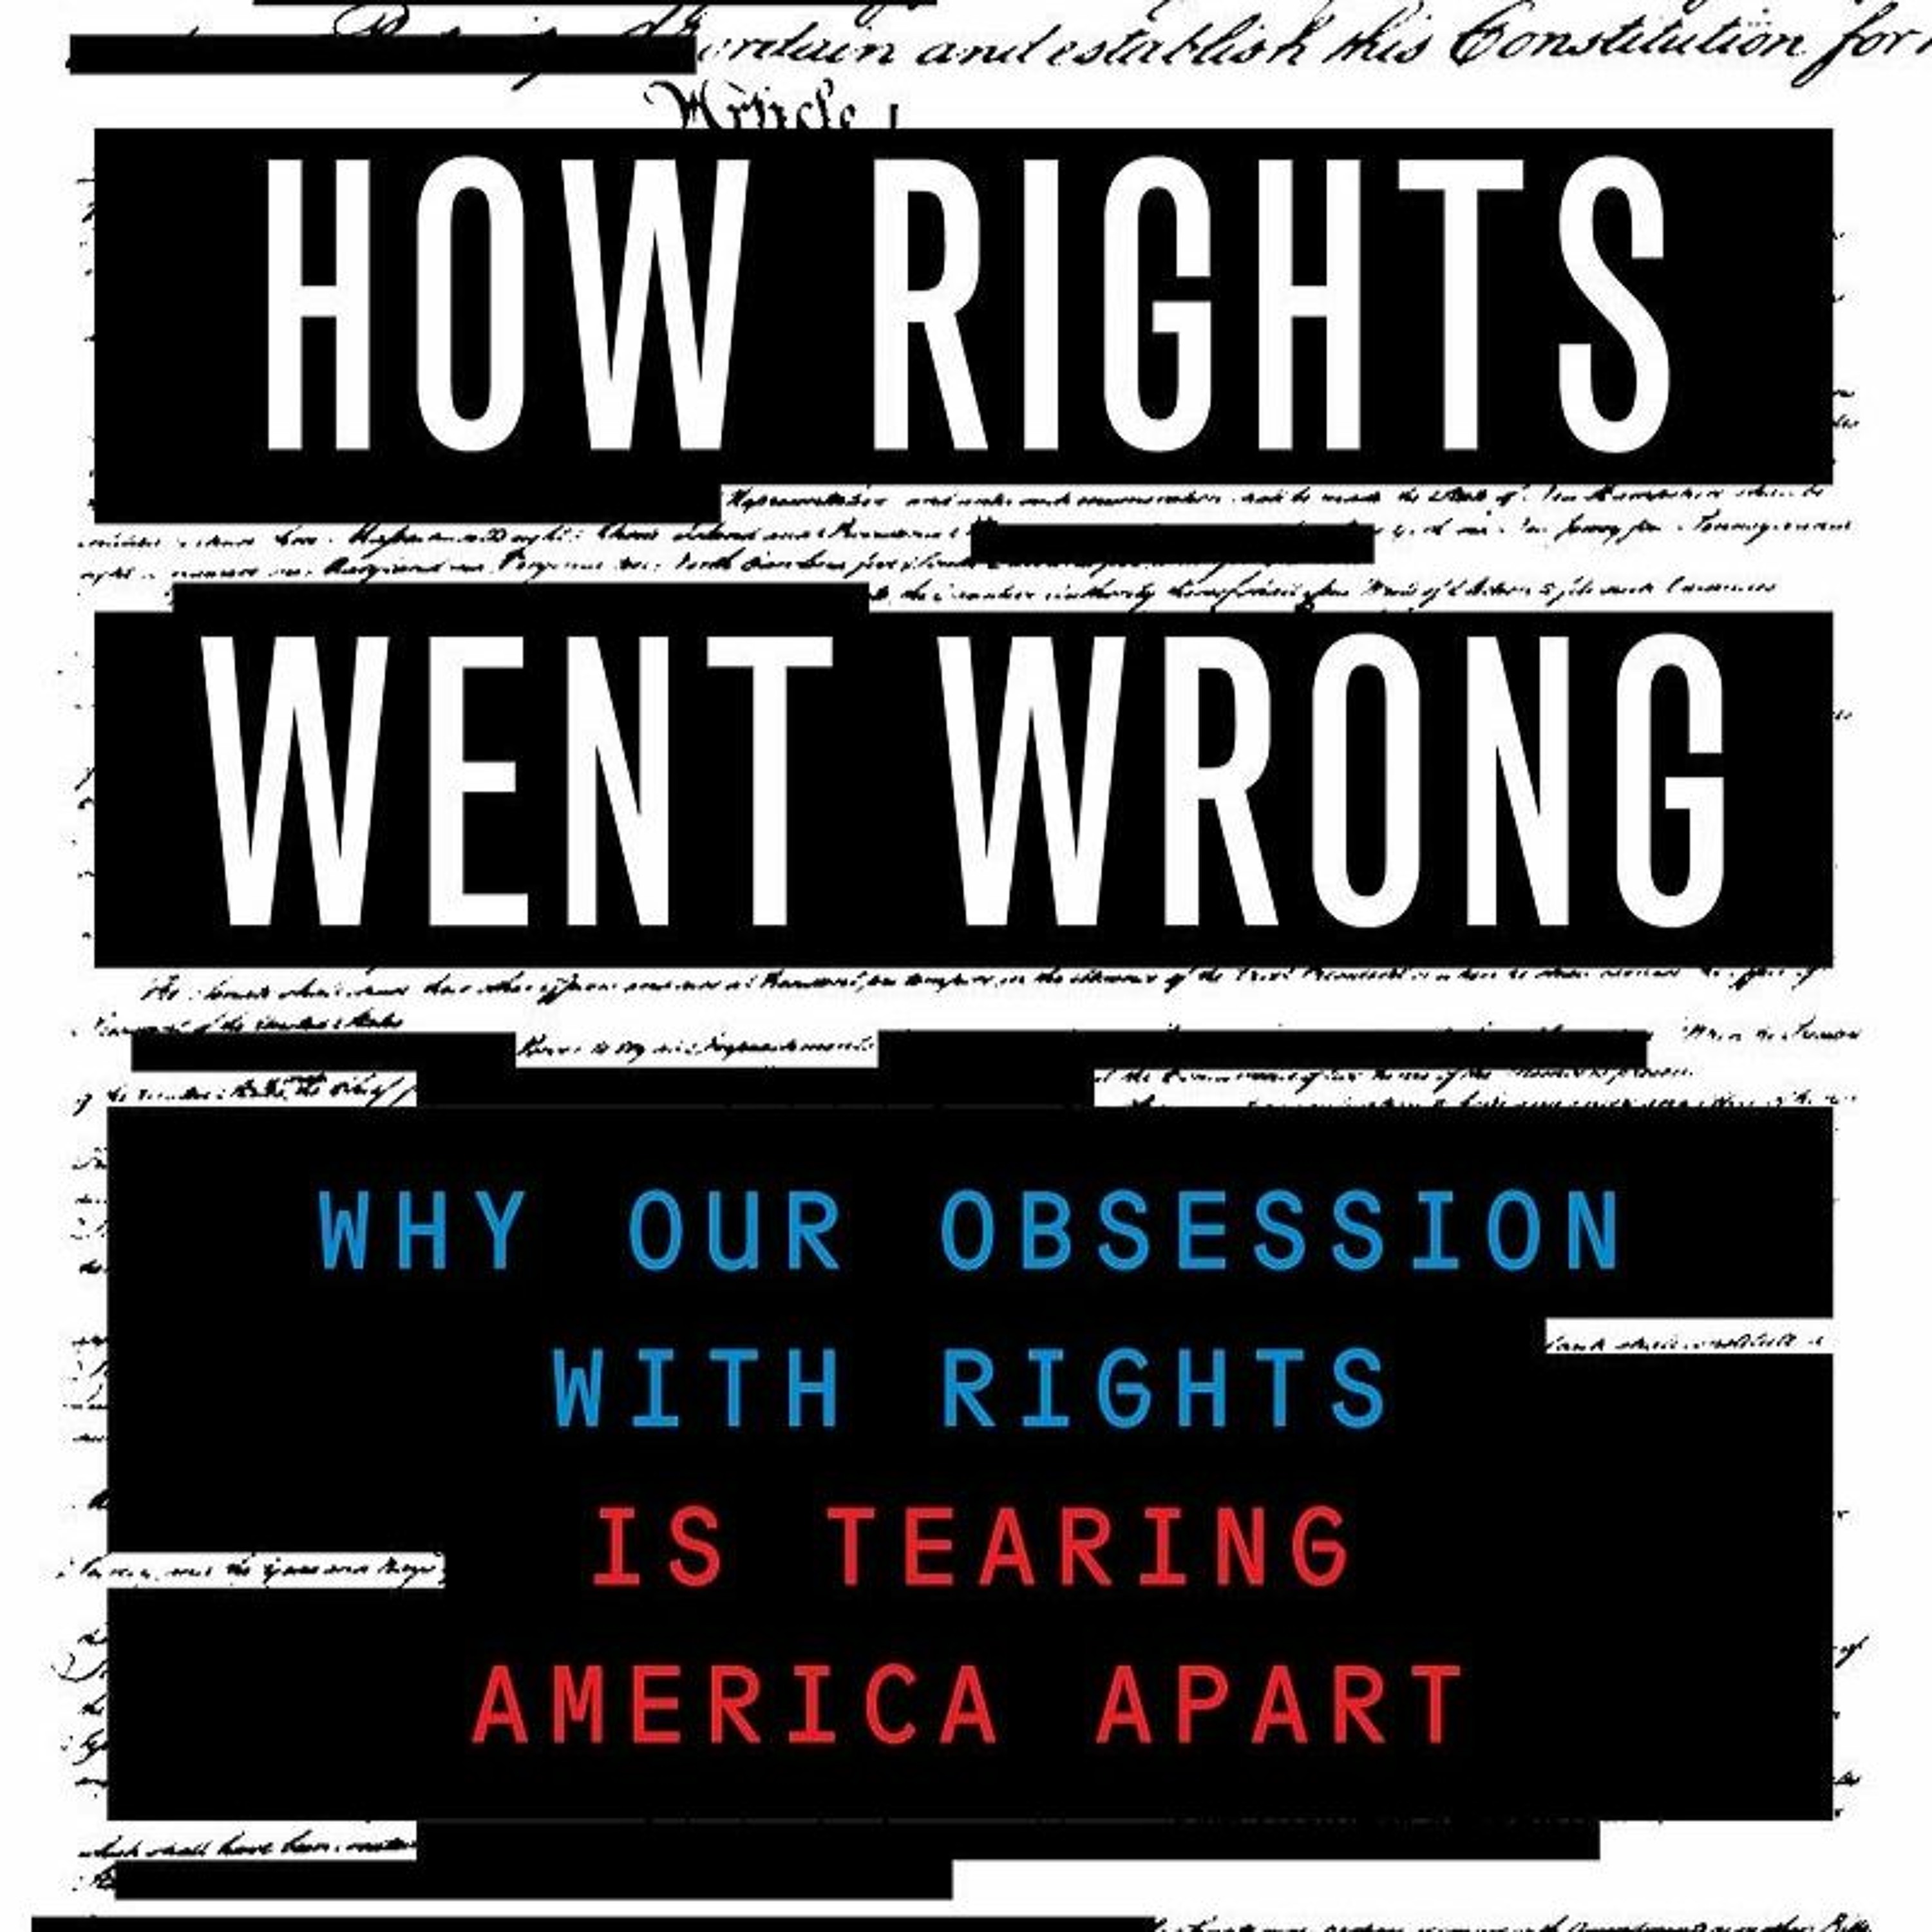 Jamal Greene and Randall Kennedy, ”How Rights Went Wrong”